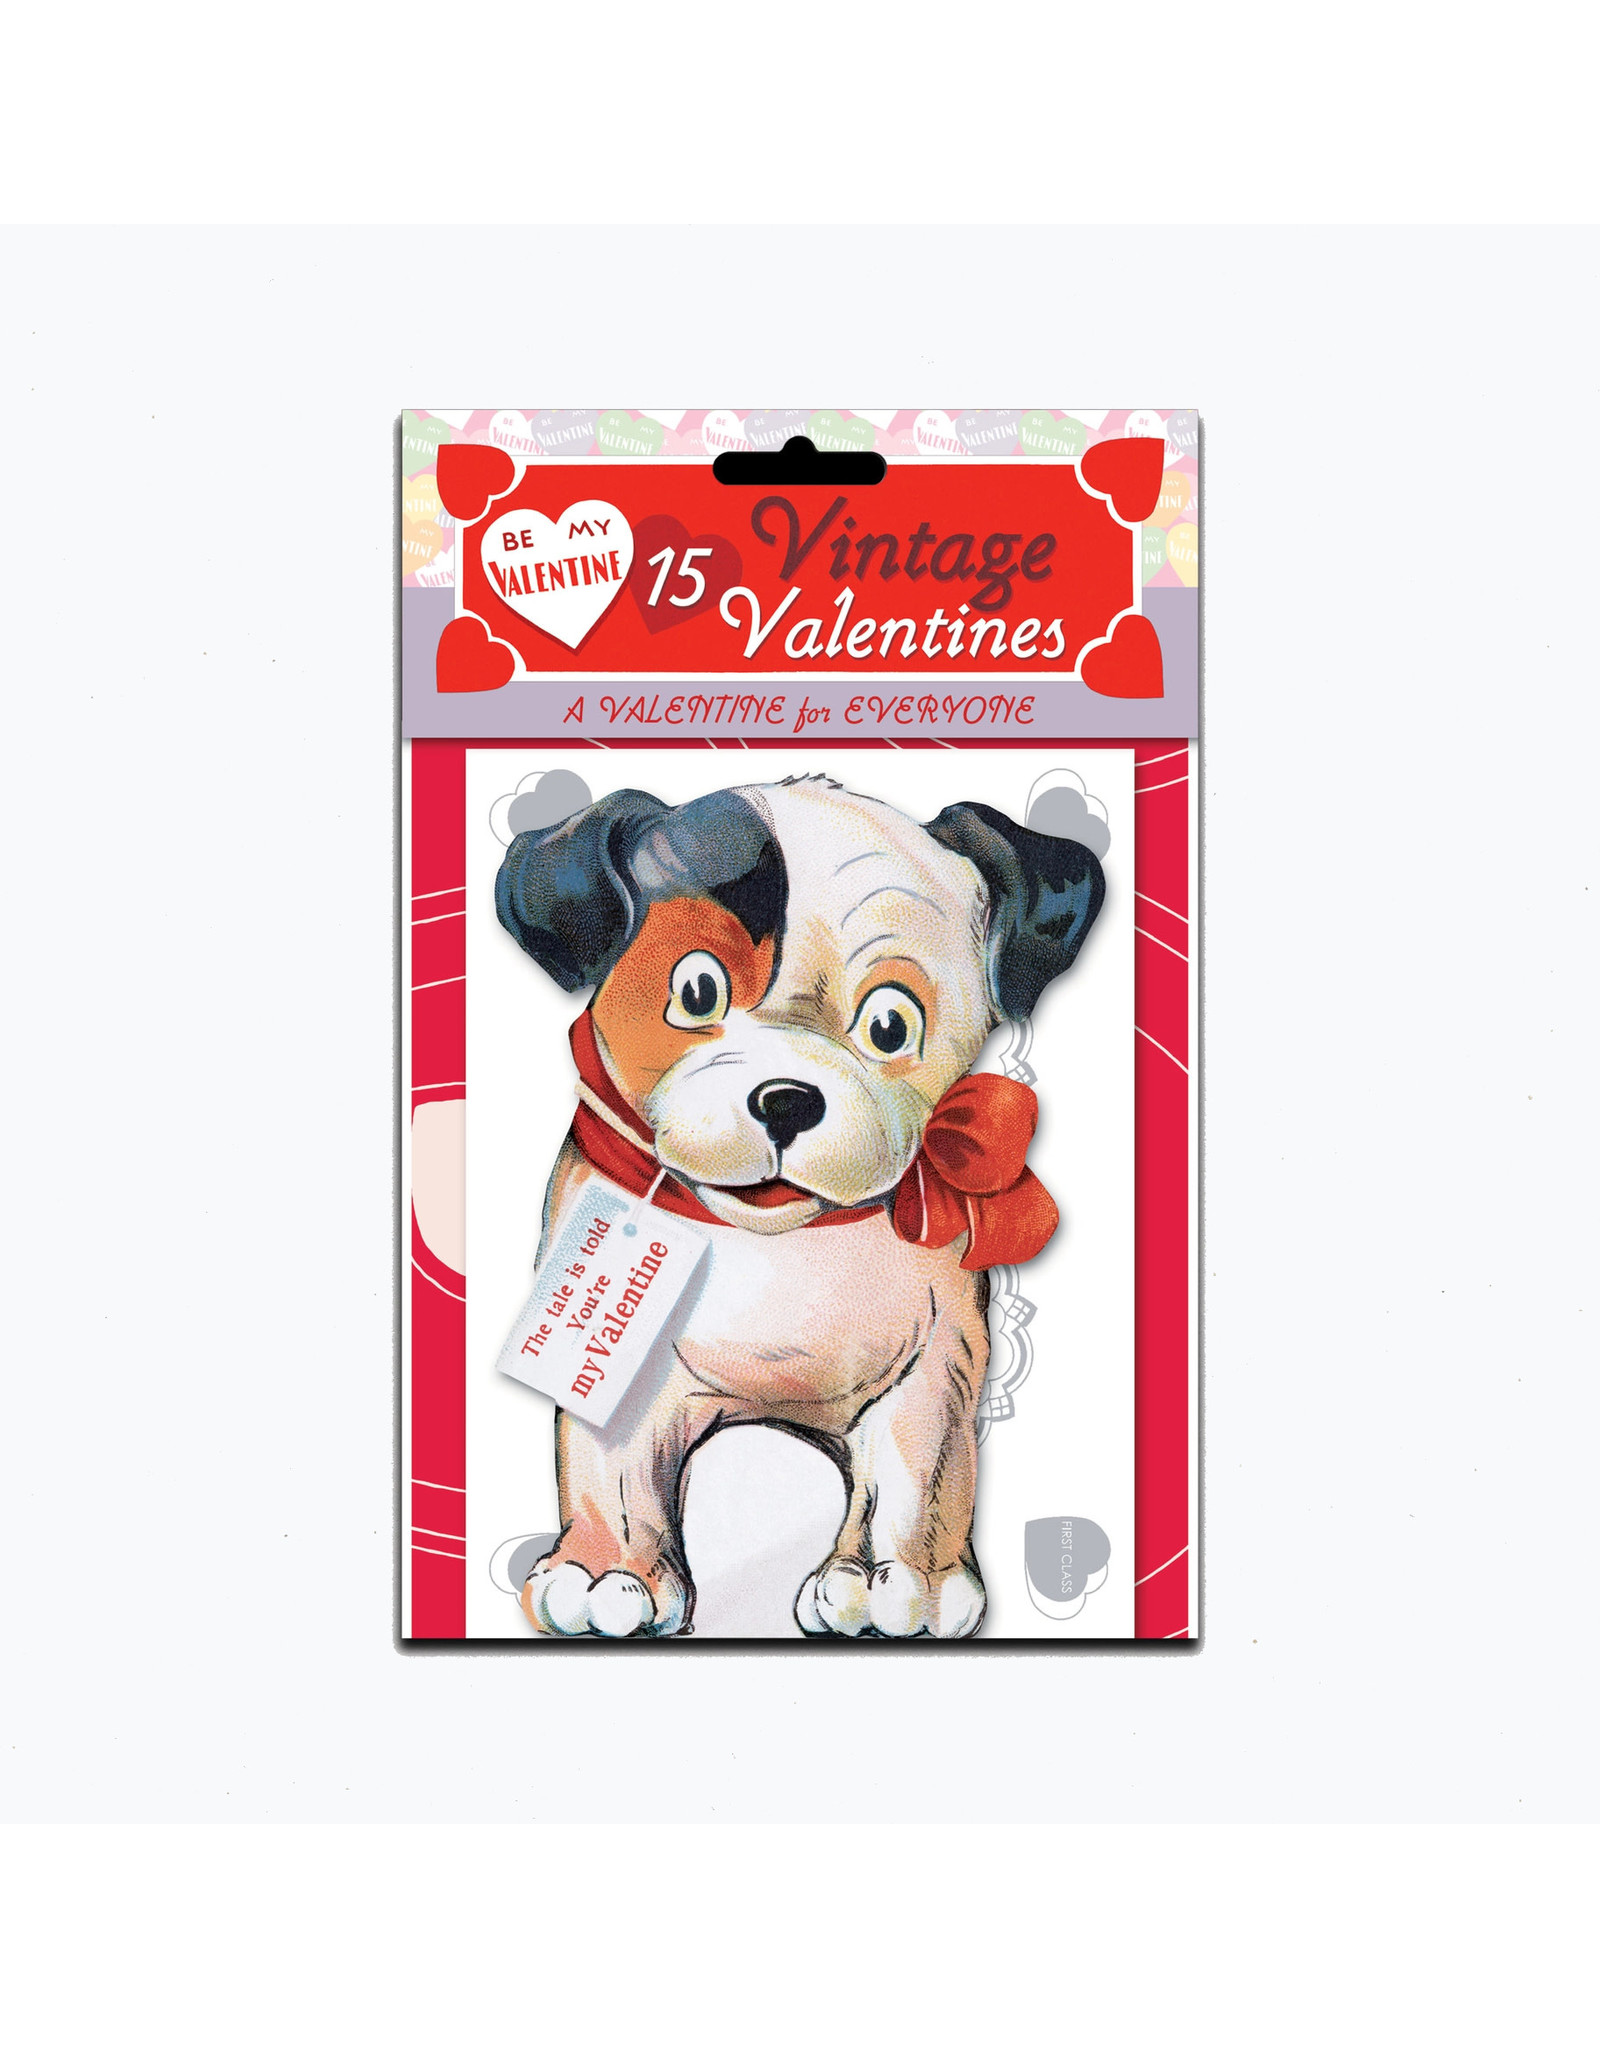 Laughing Elephant 15 Vintage Valentines Notecards: A Valentine for Everyone